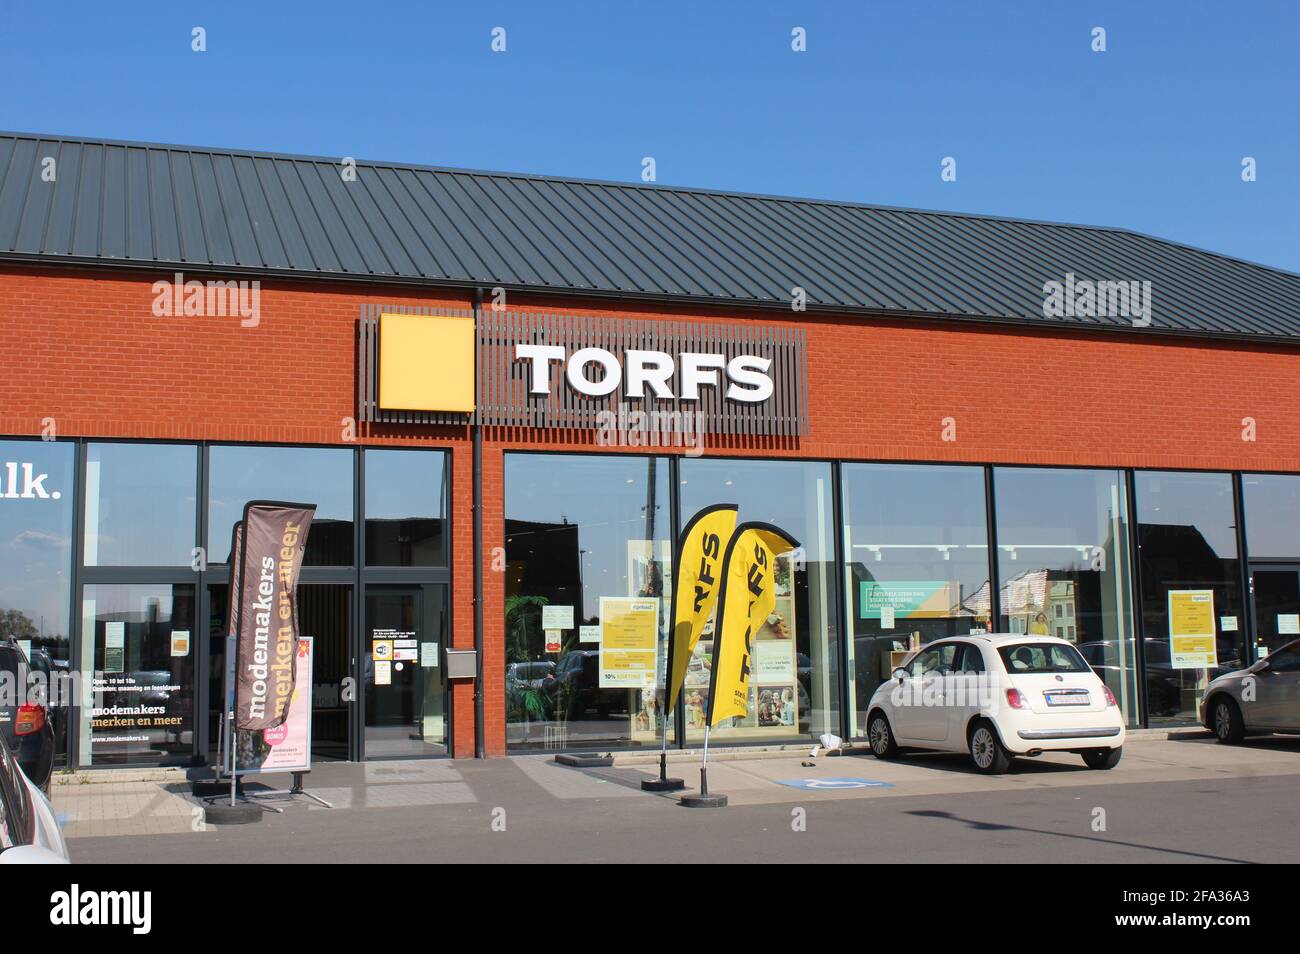 LEBBEKE, BELGIUM, 17 APRIL 2021: Exterior view of a Torfs footwear store.  Torfs is a Belgian owned chainstore with over 75 stores in the whole of  Belg Stock Photo - Alamy